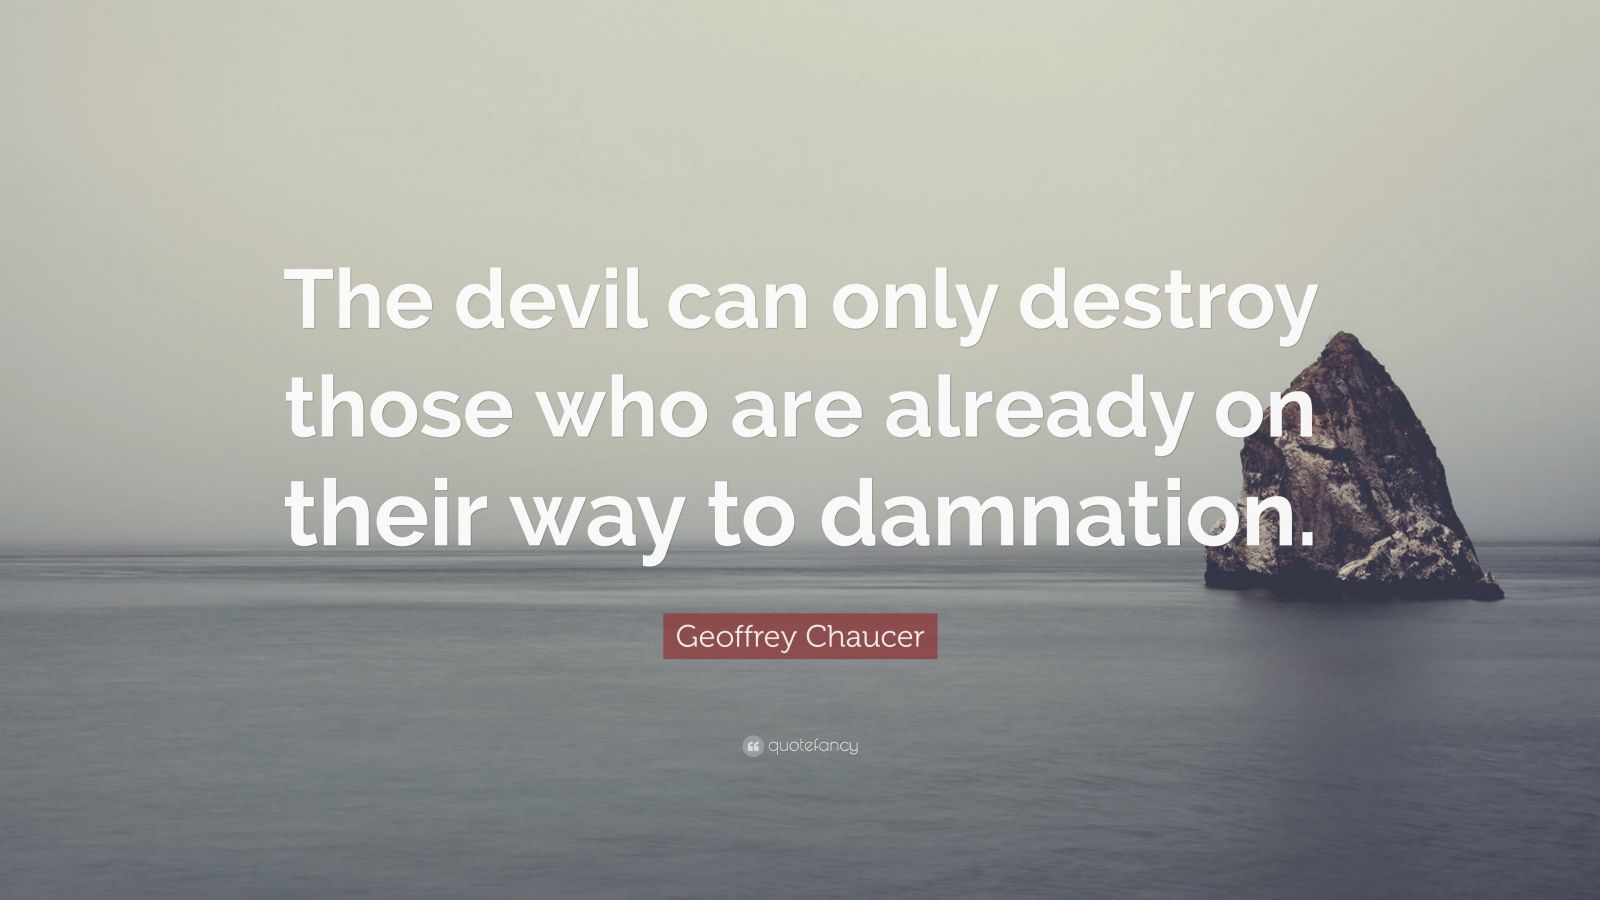 Geoffrey Chaucer Quote: “The devil can only destroy those who are